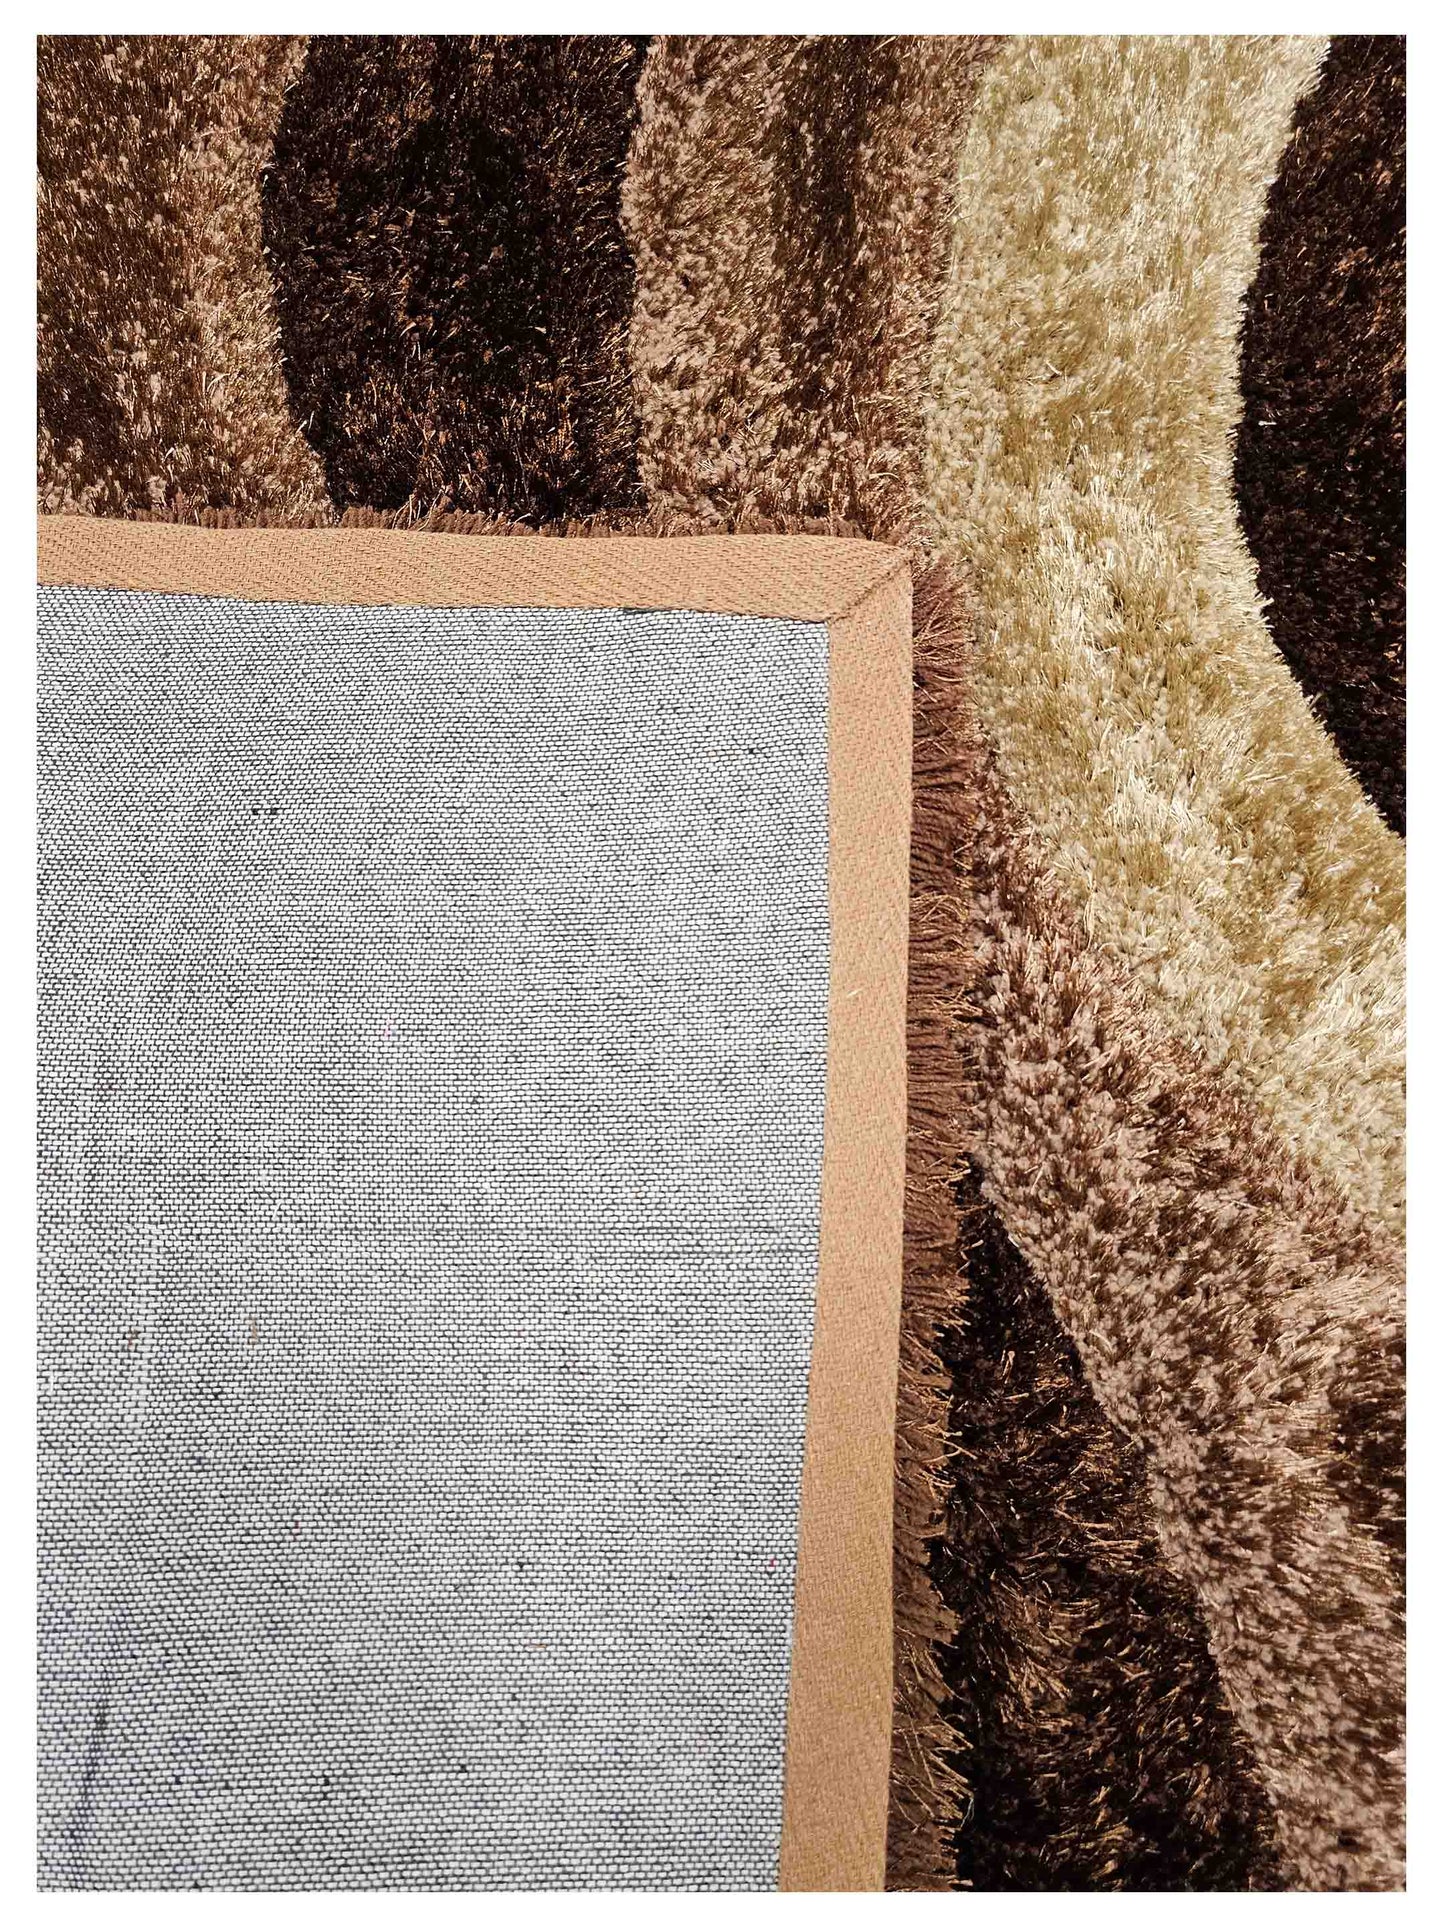 American Cover Design 3D Shaggy 3D 805 Coco  Modern Tufted Rug